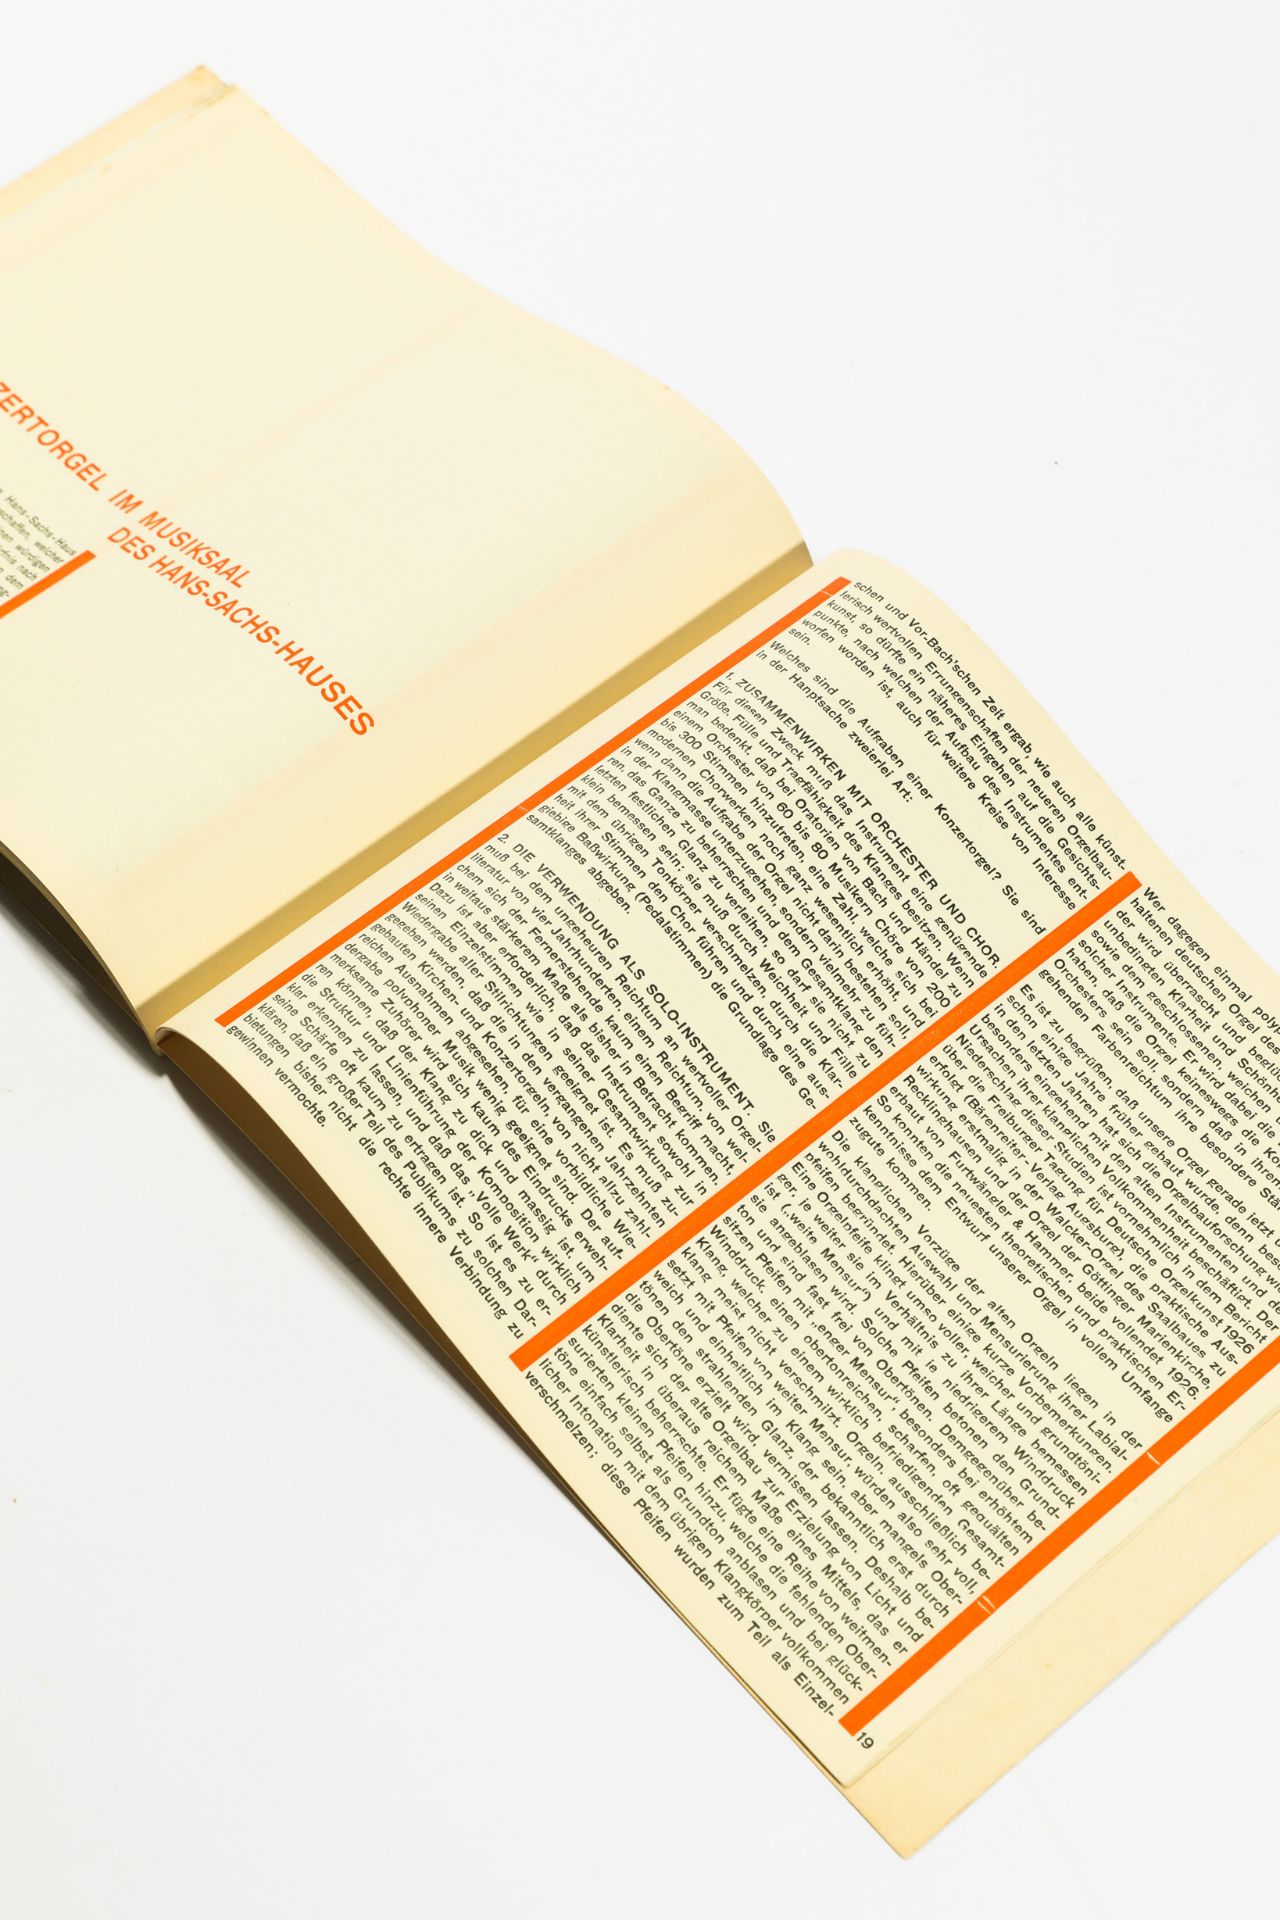 Max Burchartz, 6 Books/ Typographies after his designs - Image 13 of 21